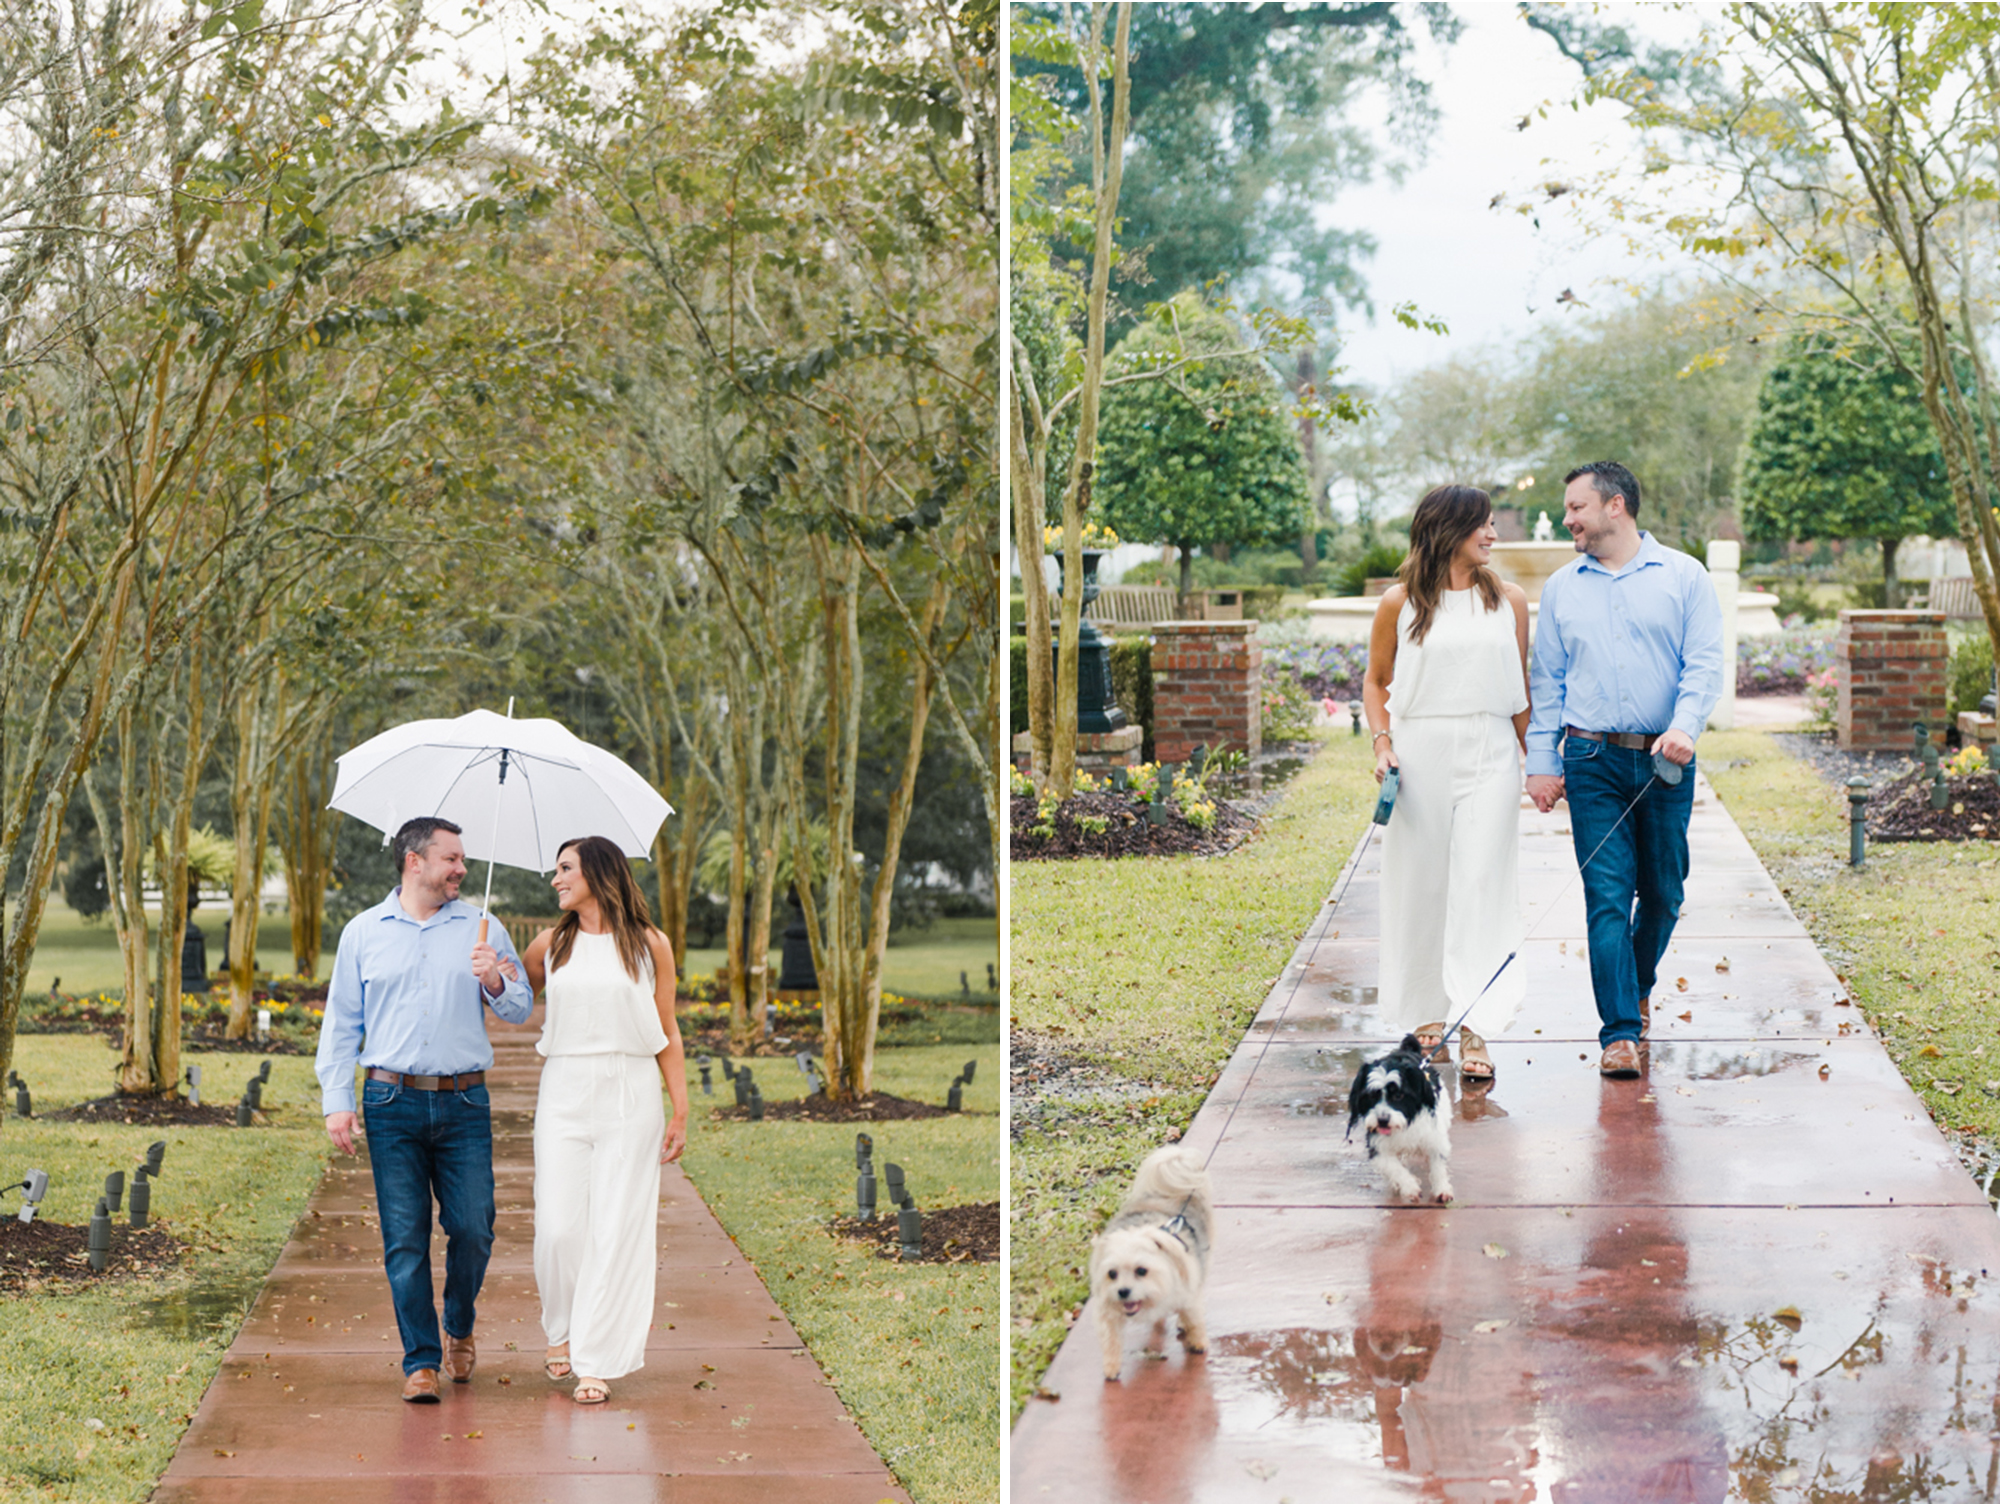 Engaged couple walking in the rain with umbrella